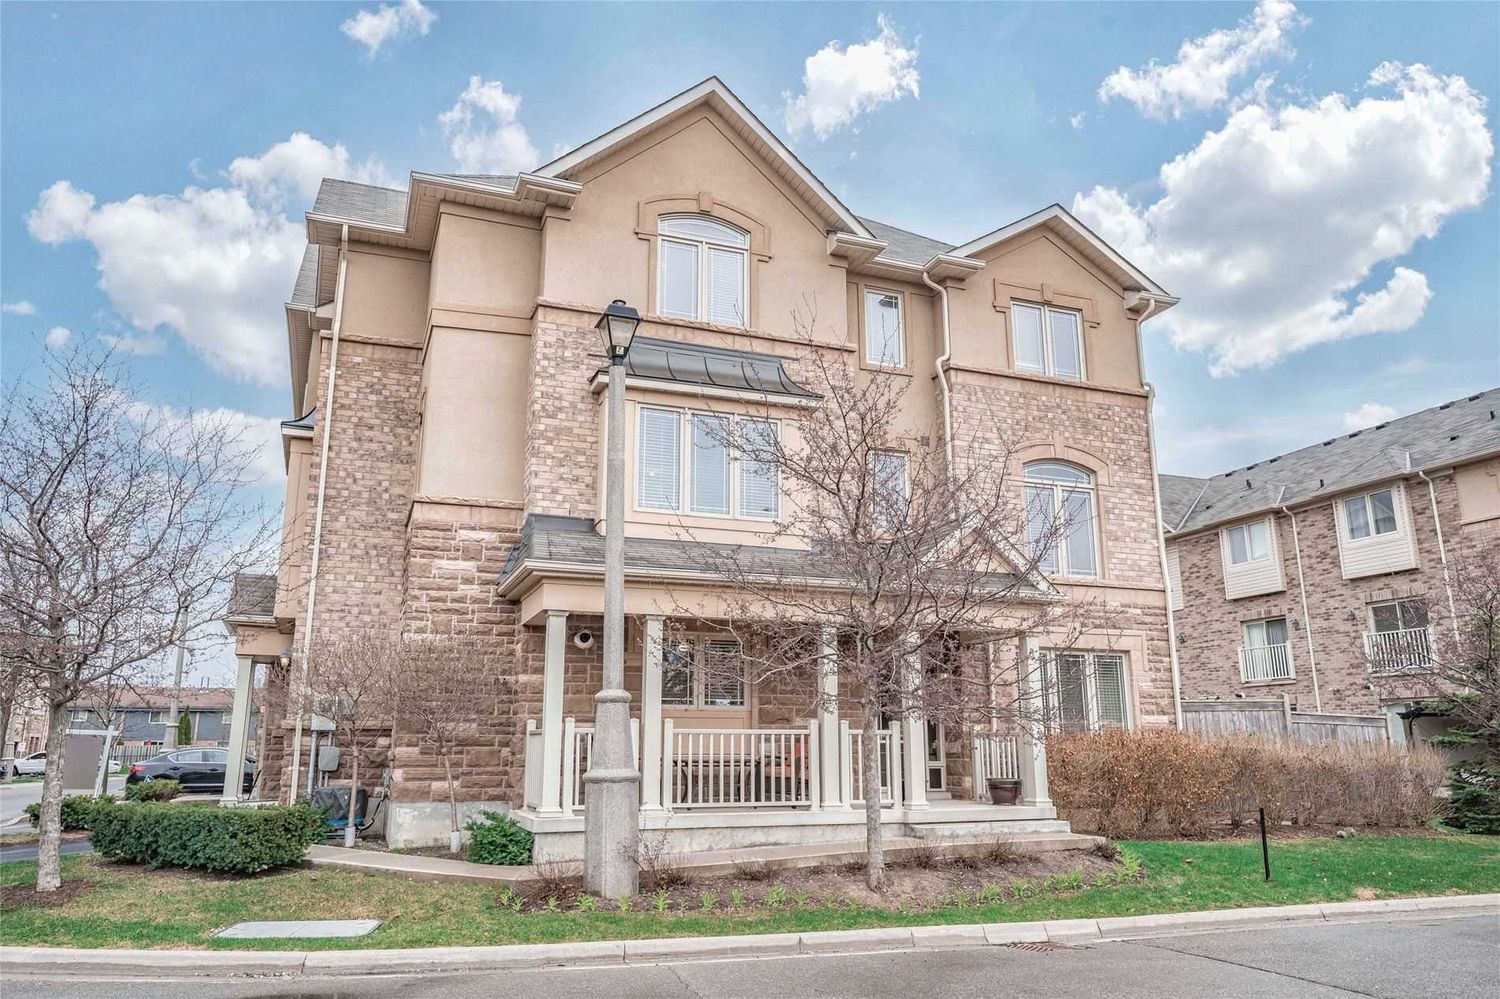 6625 Falconer Drive. 6625 Falconer Drive Townhomes is located in  Mississauga, Toronto - image #1 of 2